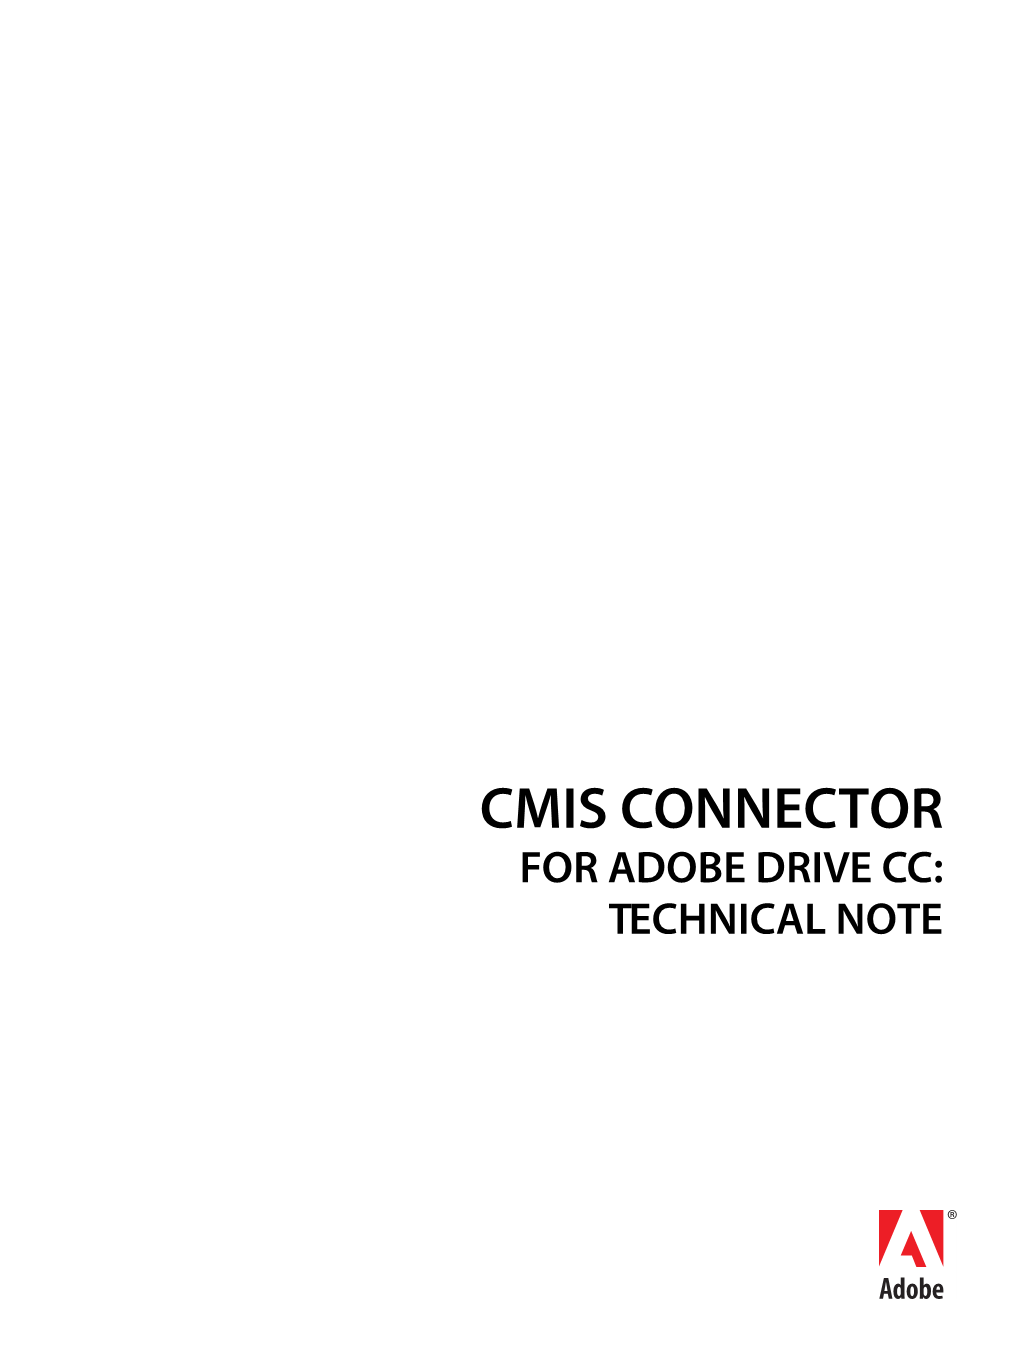 CMIS CONNECTOR for ADOBE DRIVE CC: TECHNICAL NOTE © 2013 Adobe Systems Incorporated